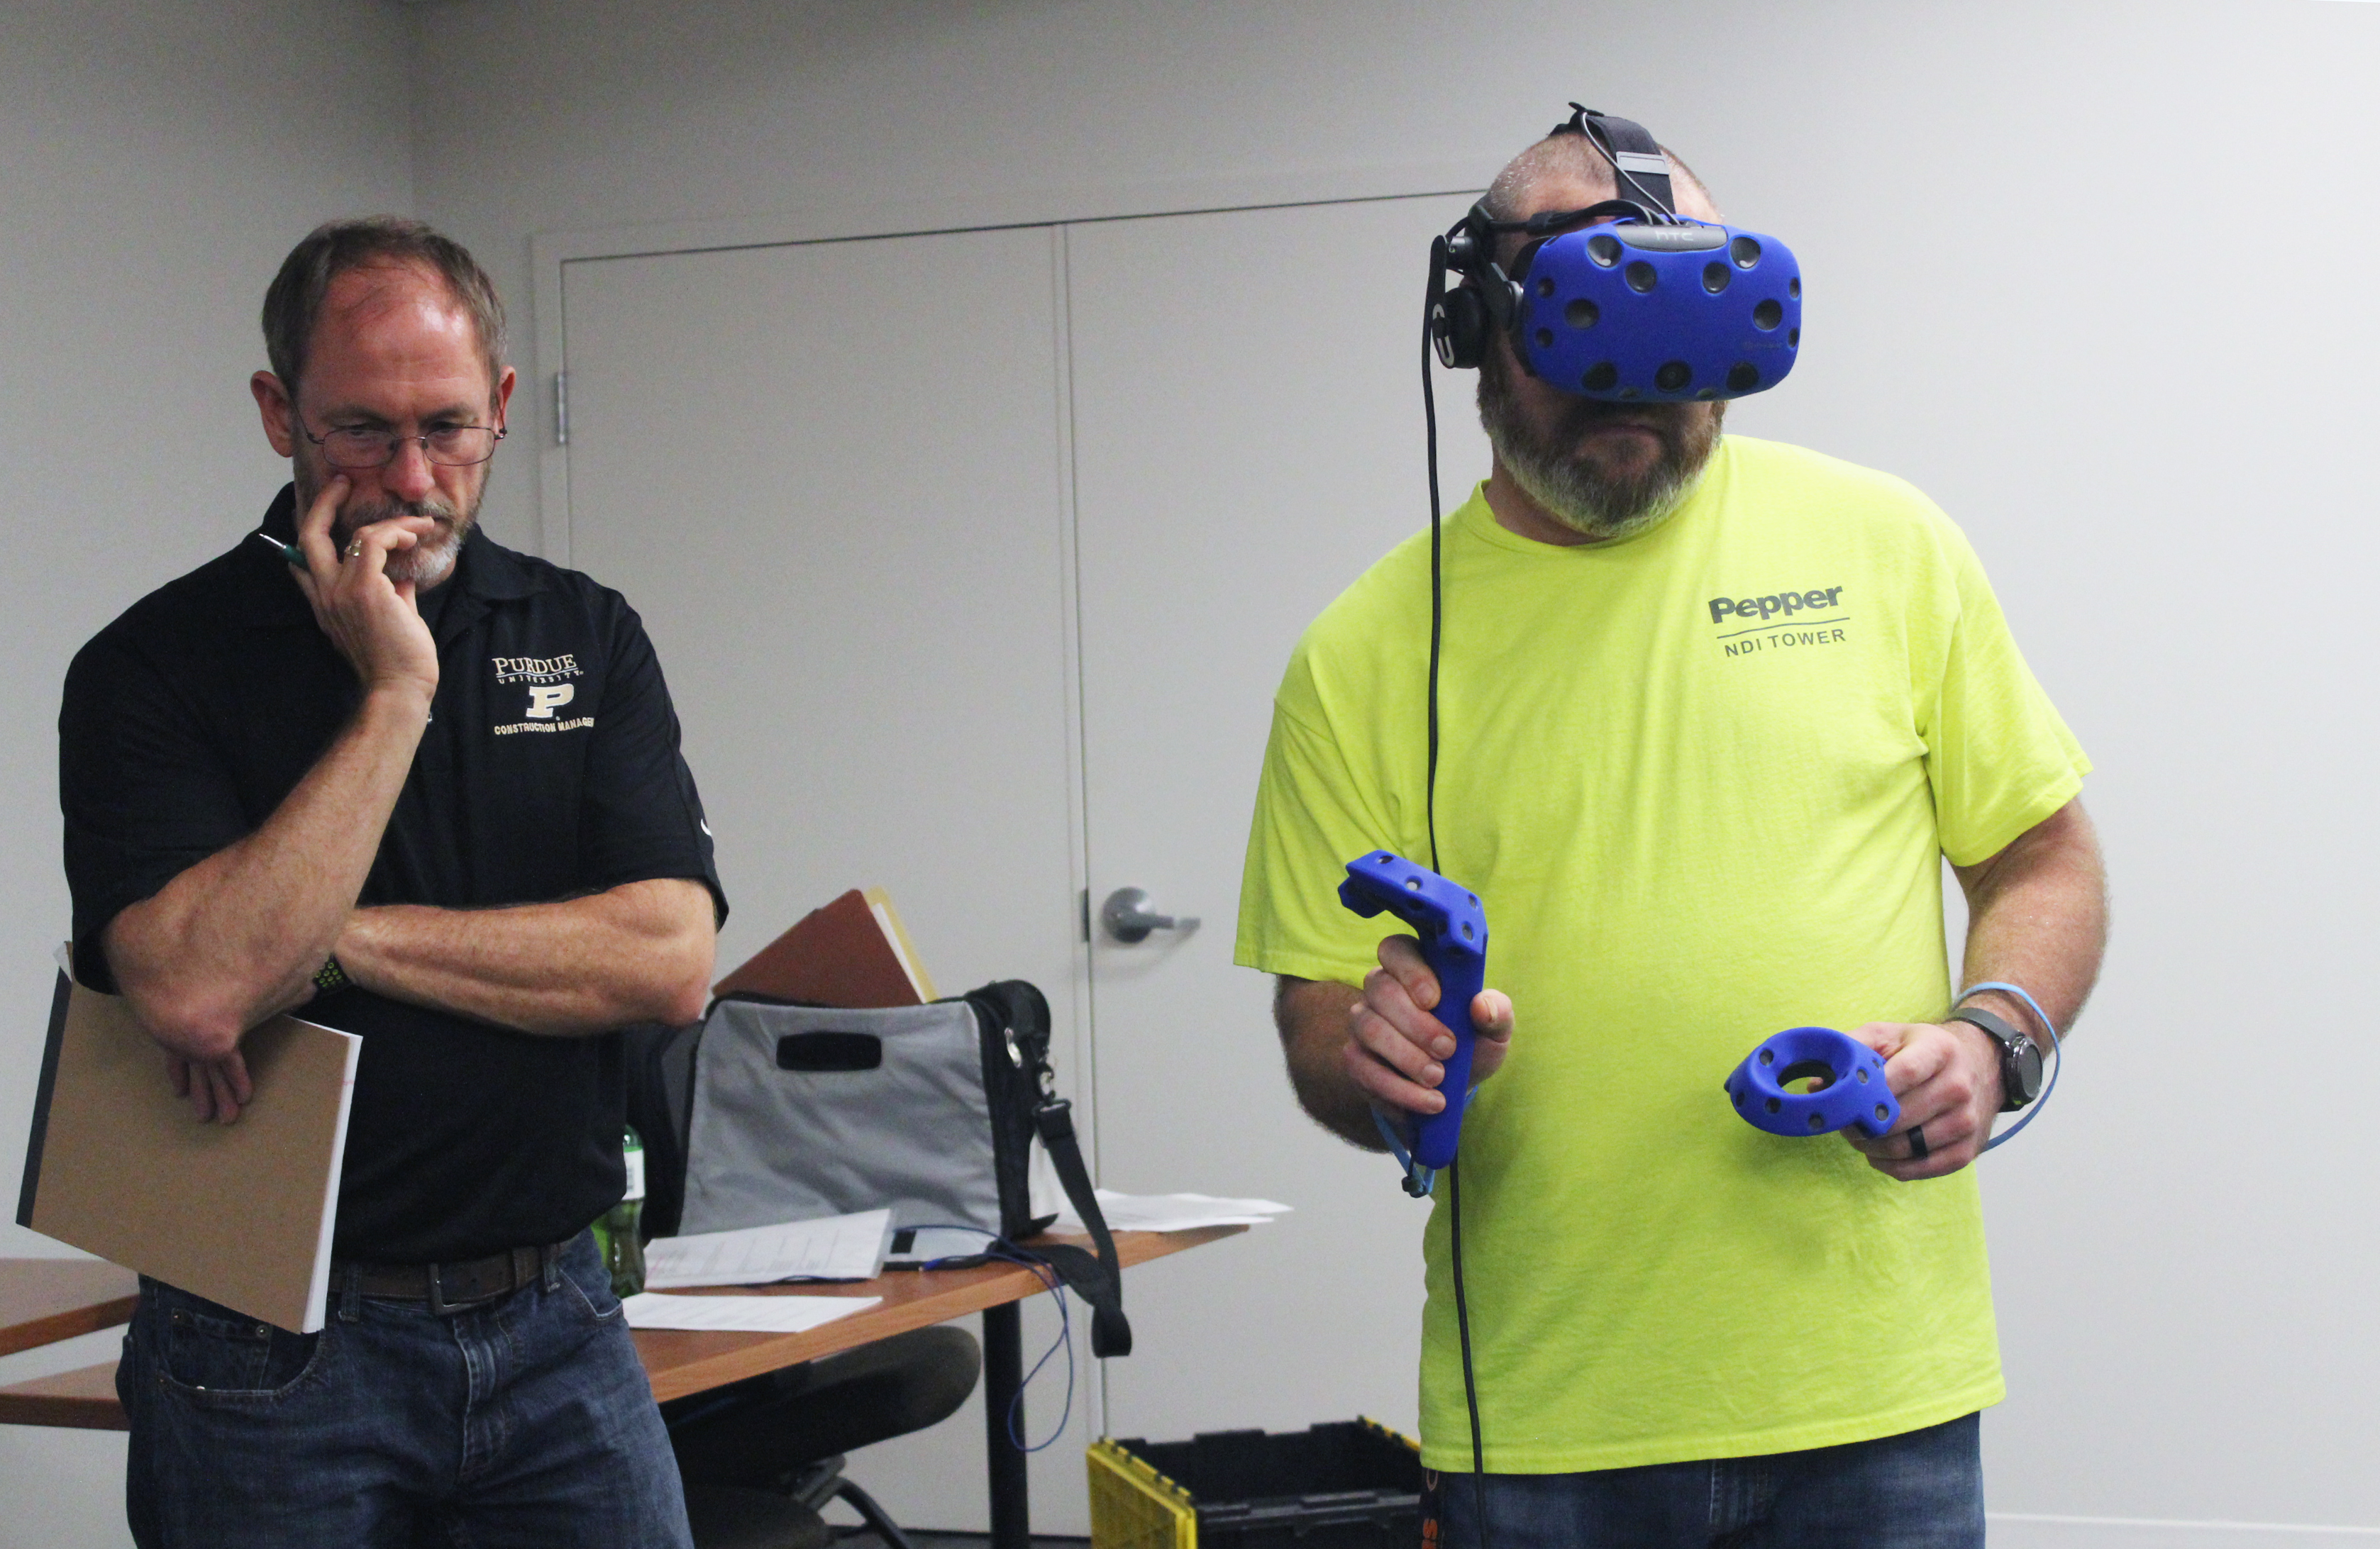 Virtual reality for safety training